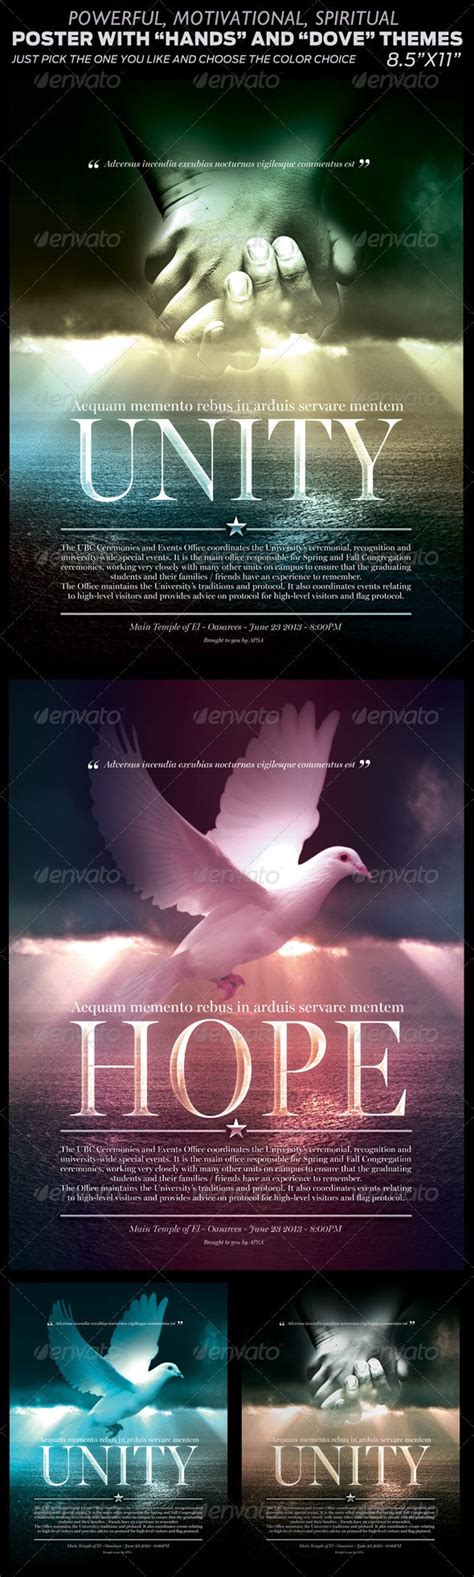 Spiritual Poster With Two Themes Print Templates Graphicriver